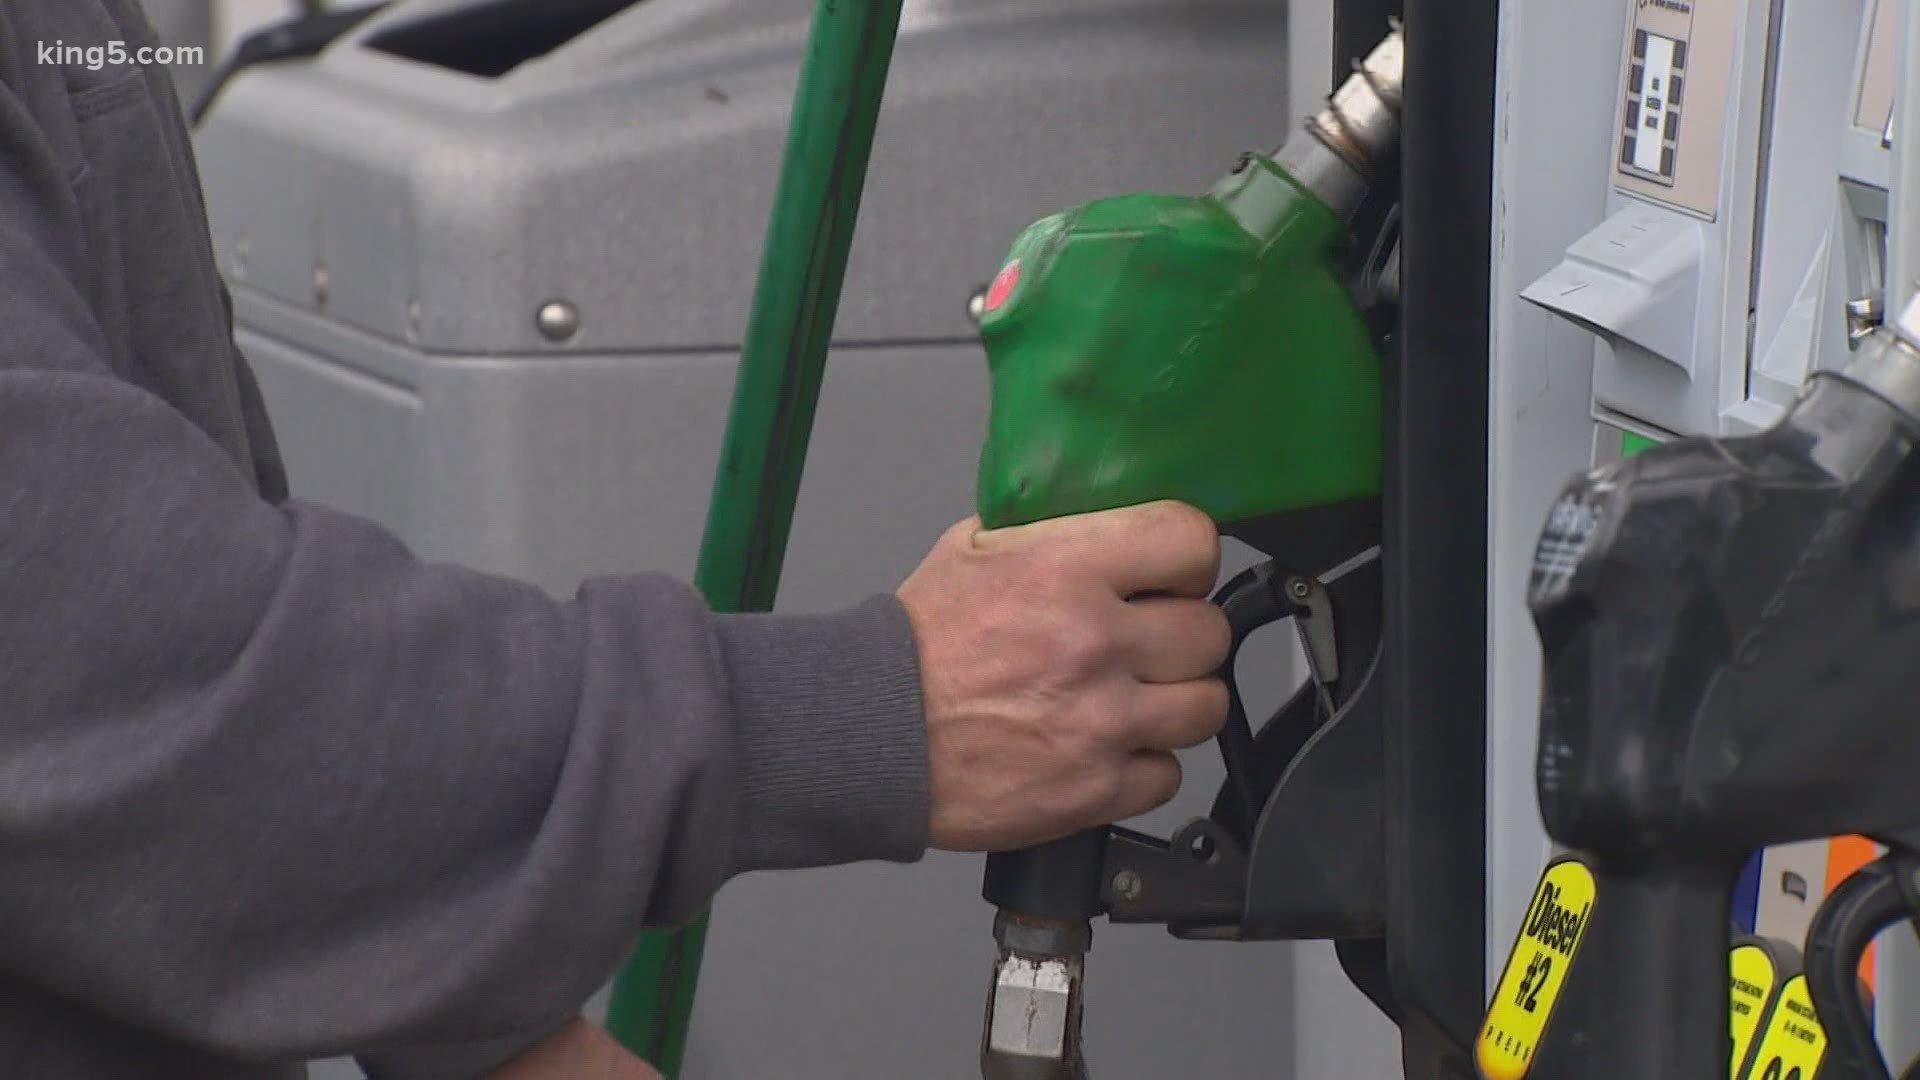 Bill proposed in the state House would raise gas tax by 18 cents over two years, and pay for several road and transportation projects.